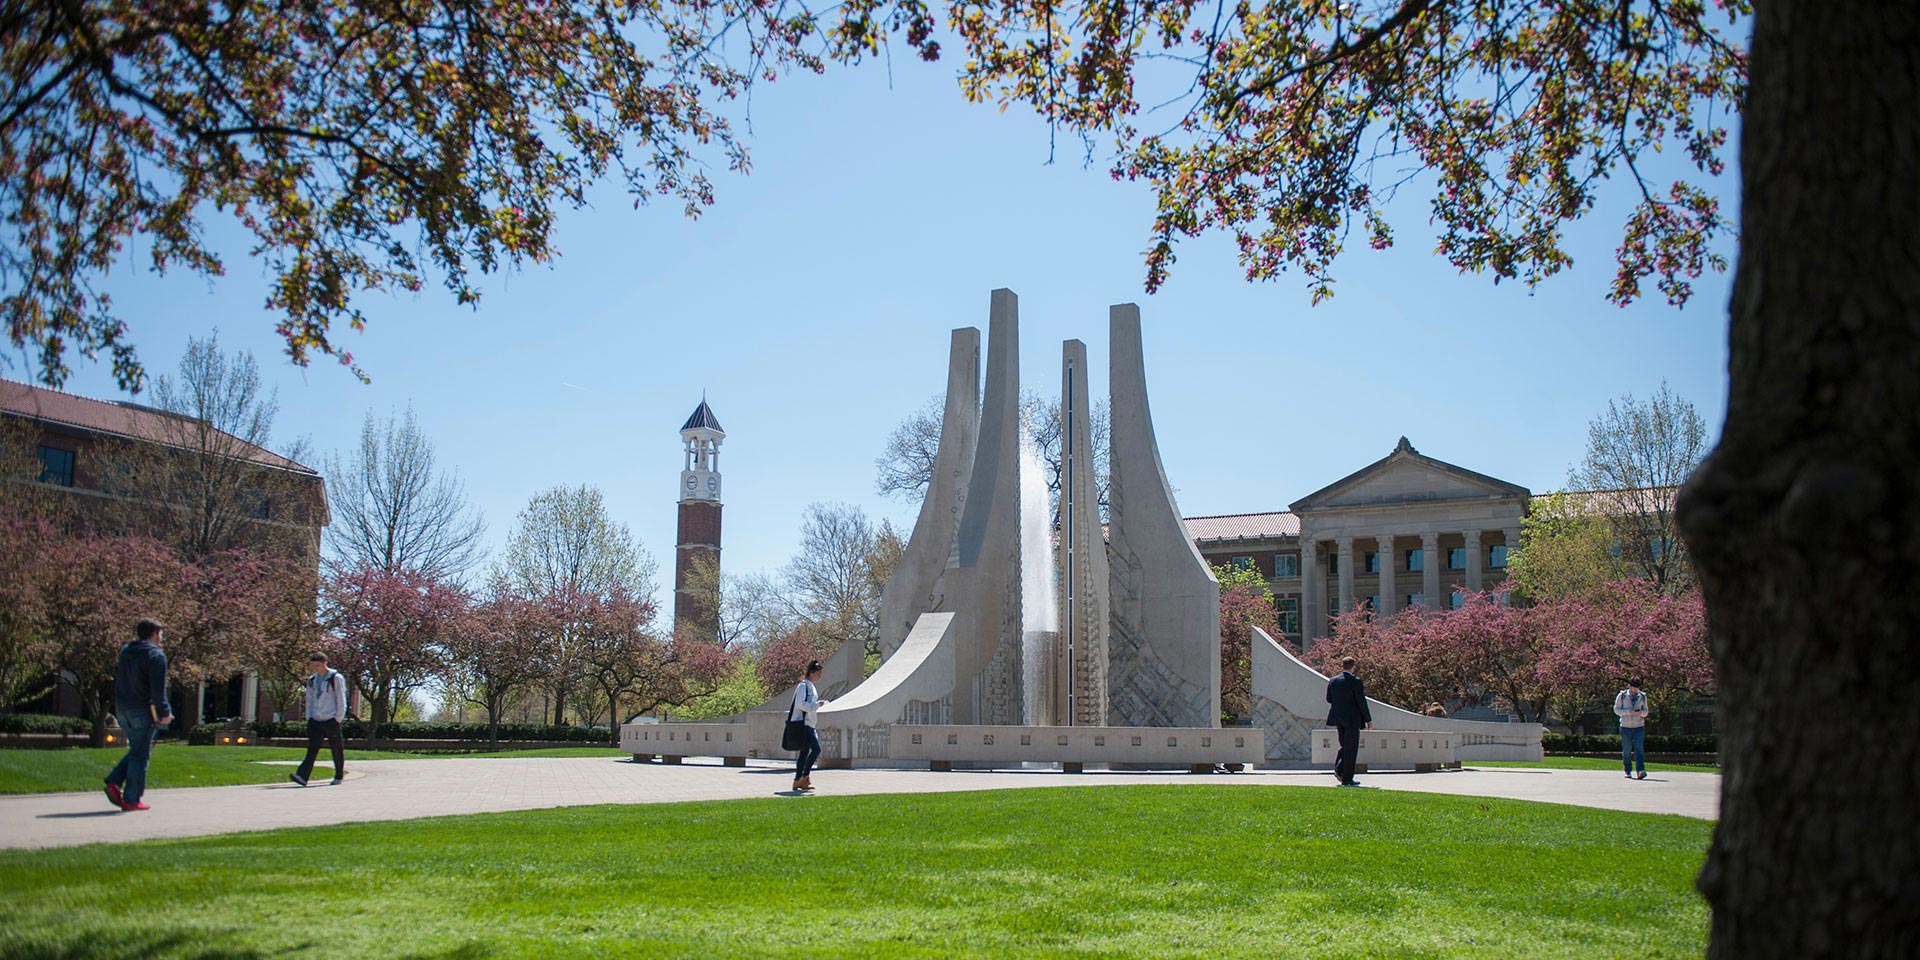 Purdue University Bell Tower and Engineering Fountain.